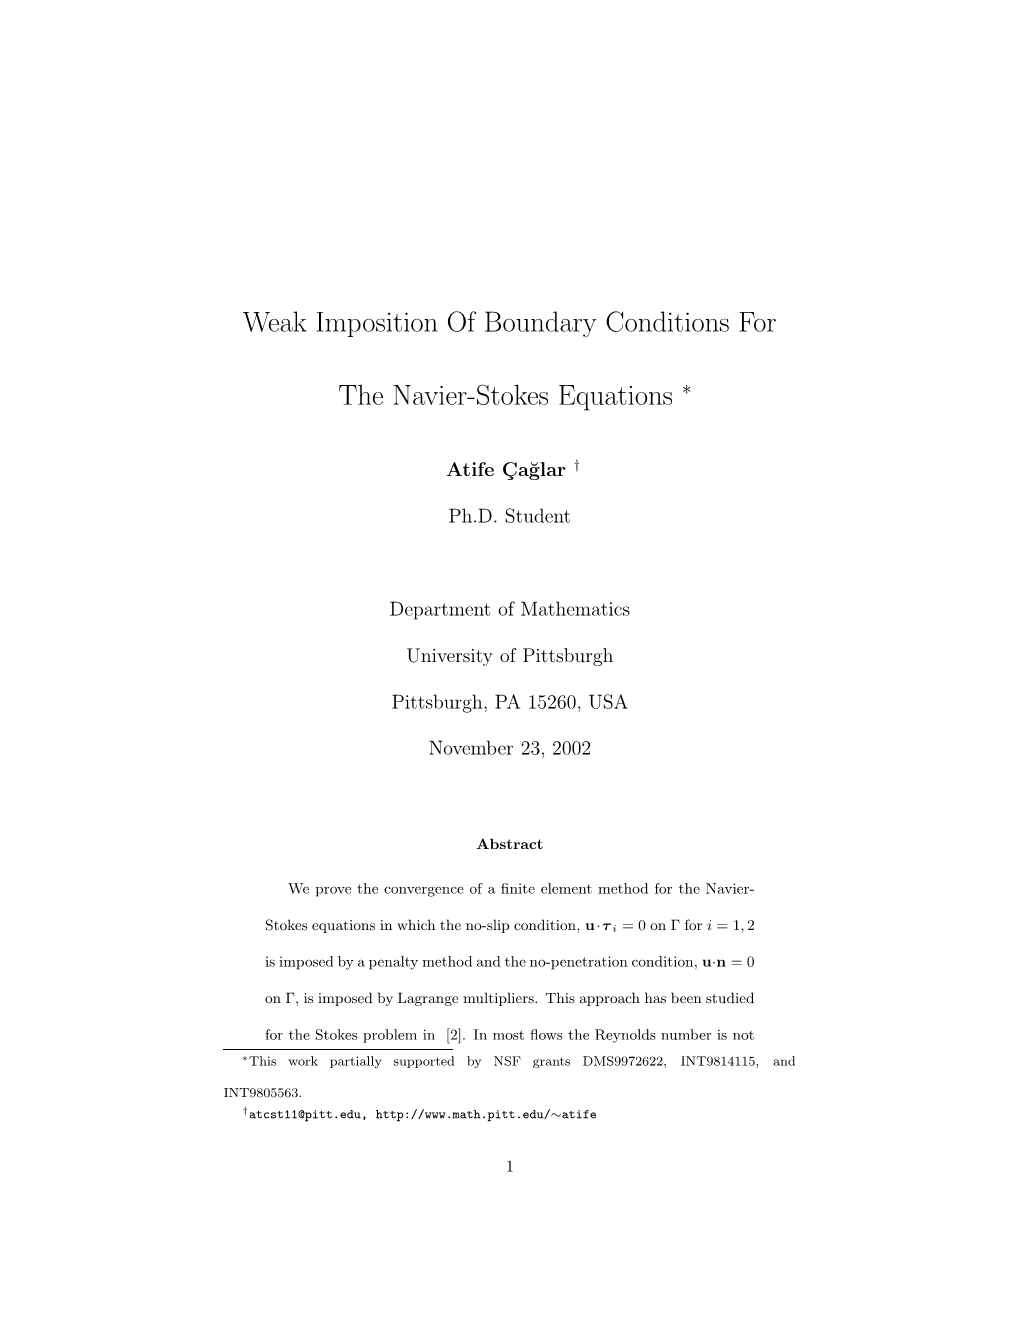 Weak Imposition of Boundary Conditions for the Navier-Stokes Equations